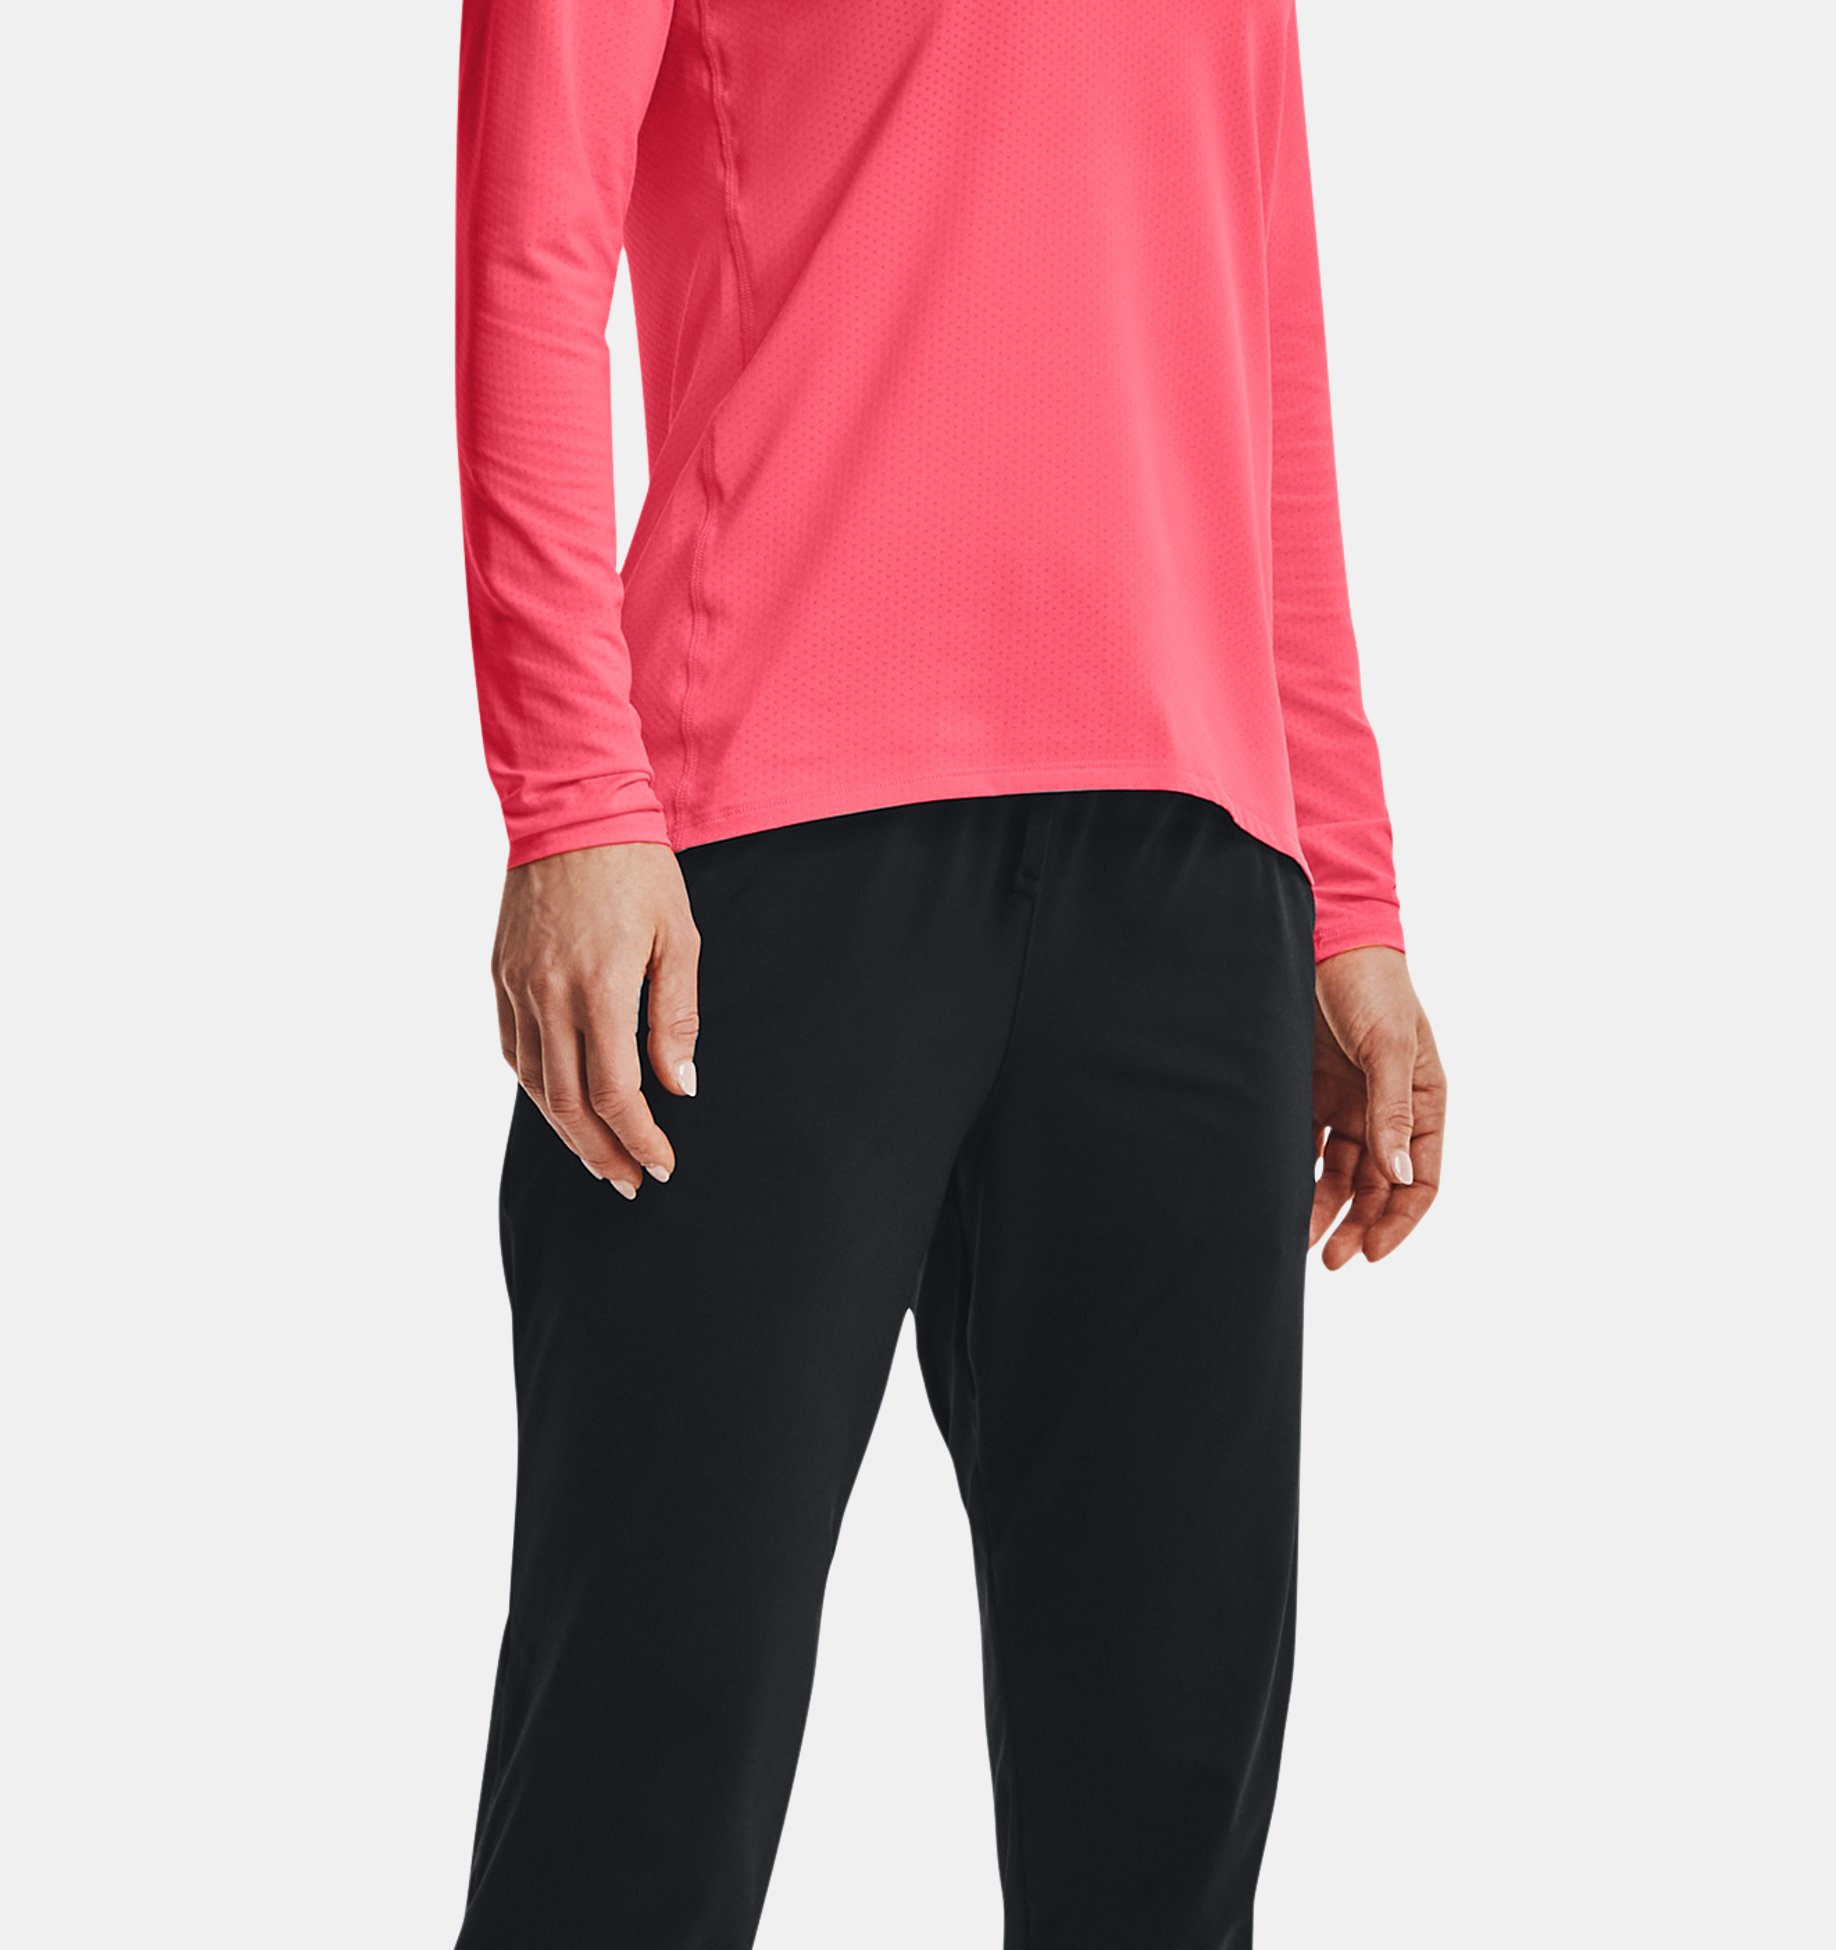 https://underarmour.scene7.com/is/image/Underarmour/V5-1369385-001_FSF?rp=standard-0pad|pdpZoomDesktop&scl=0.72&fmt=jpg&qlt=85&resMode=sharp2&cache=on,on&bgc=f0f0f0&wid=1836&hei=1950&size=1500,1500